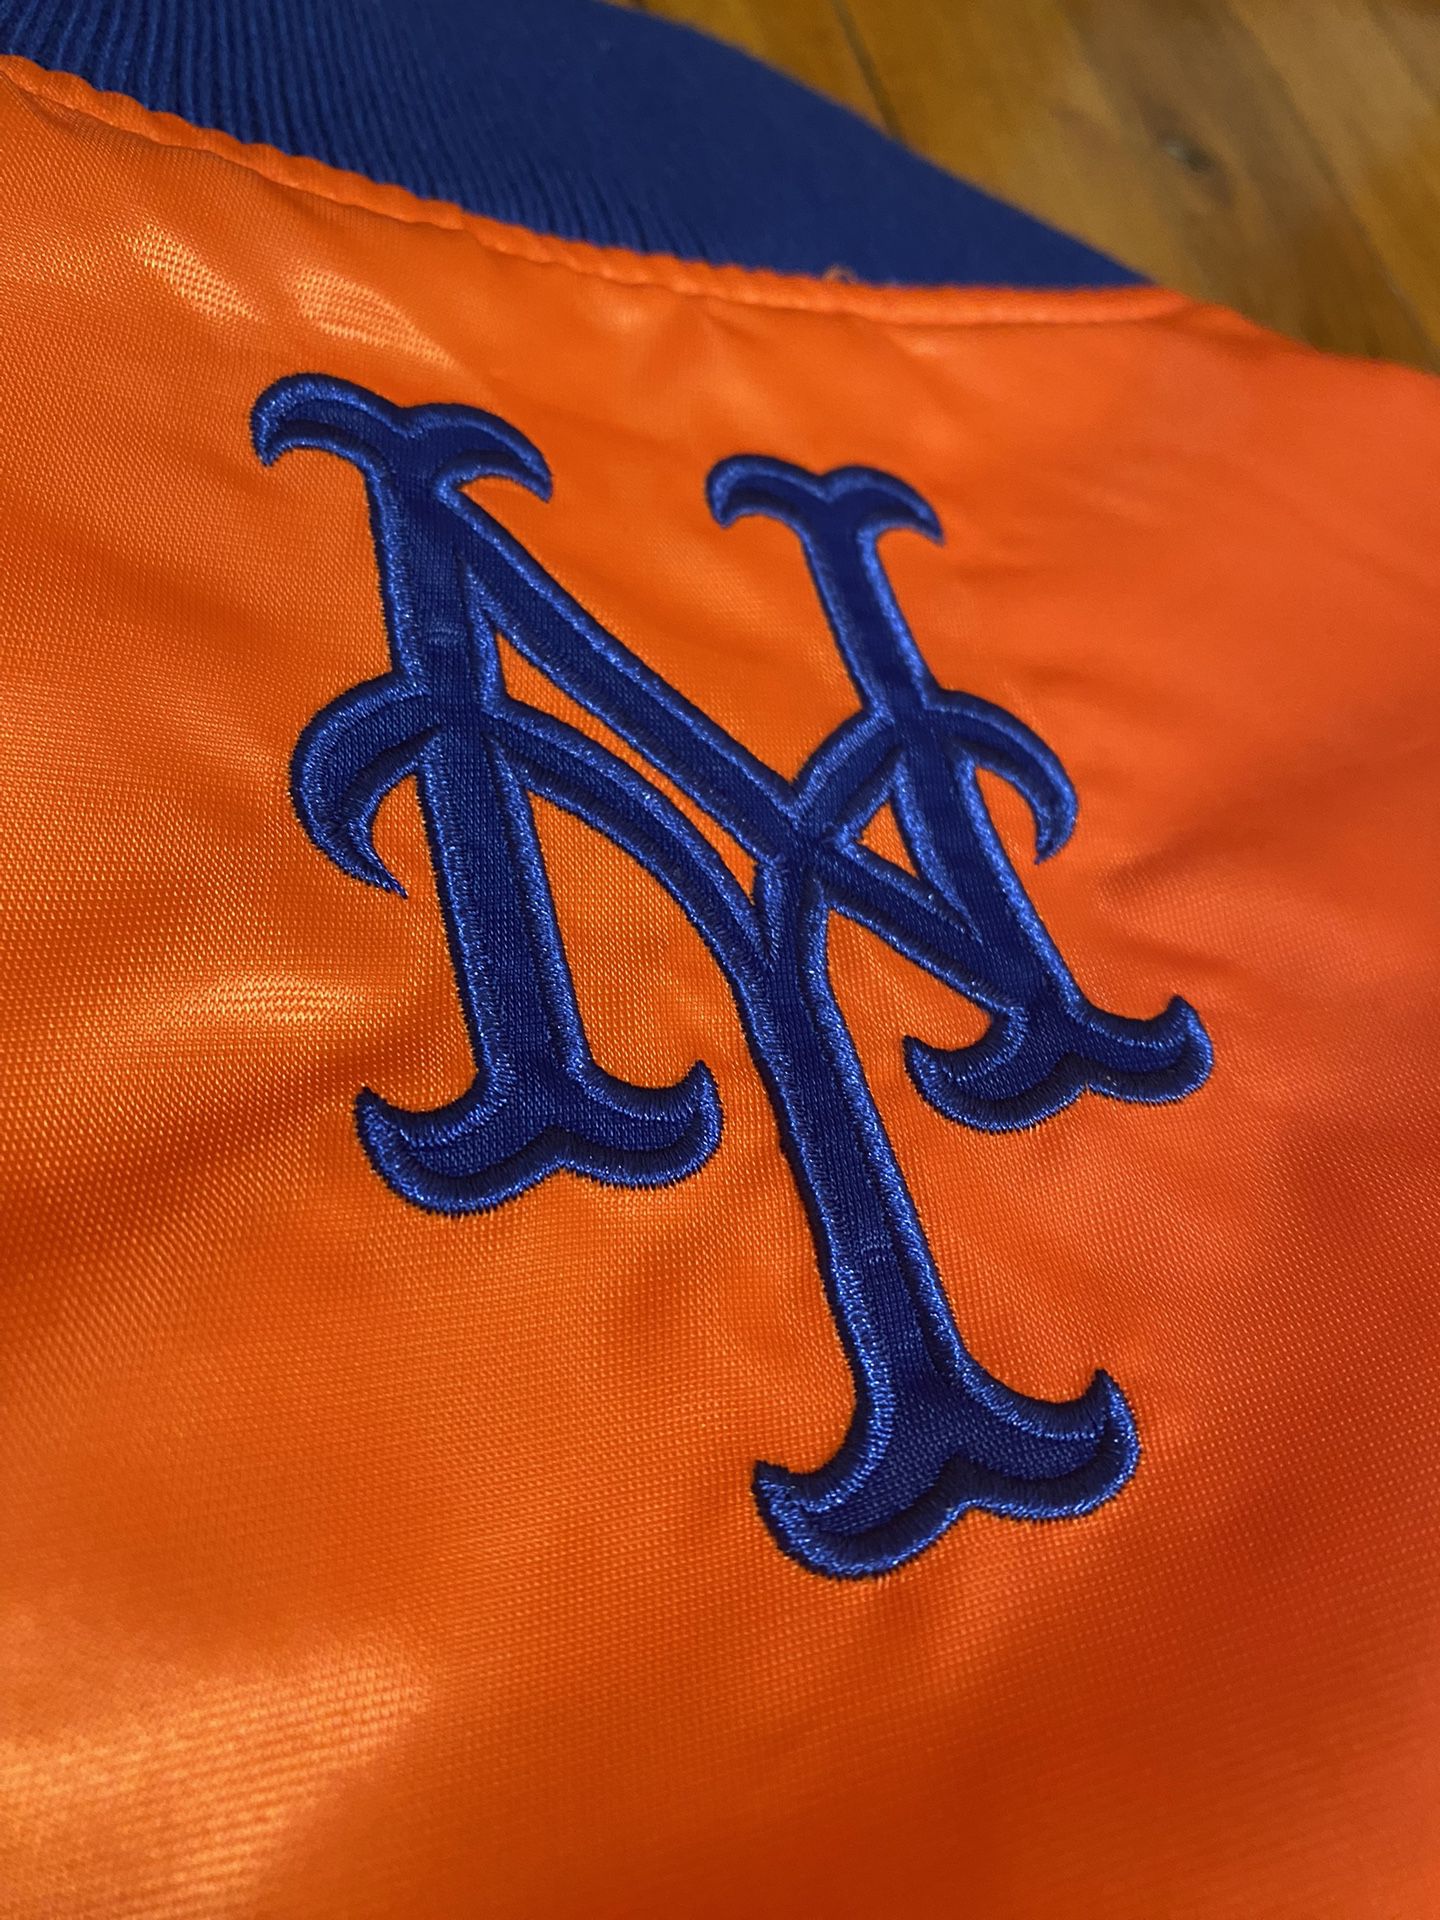 Mets Starter Jacket for Sale in Queens, NY - OfferUp